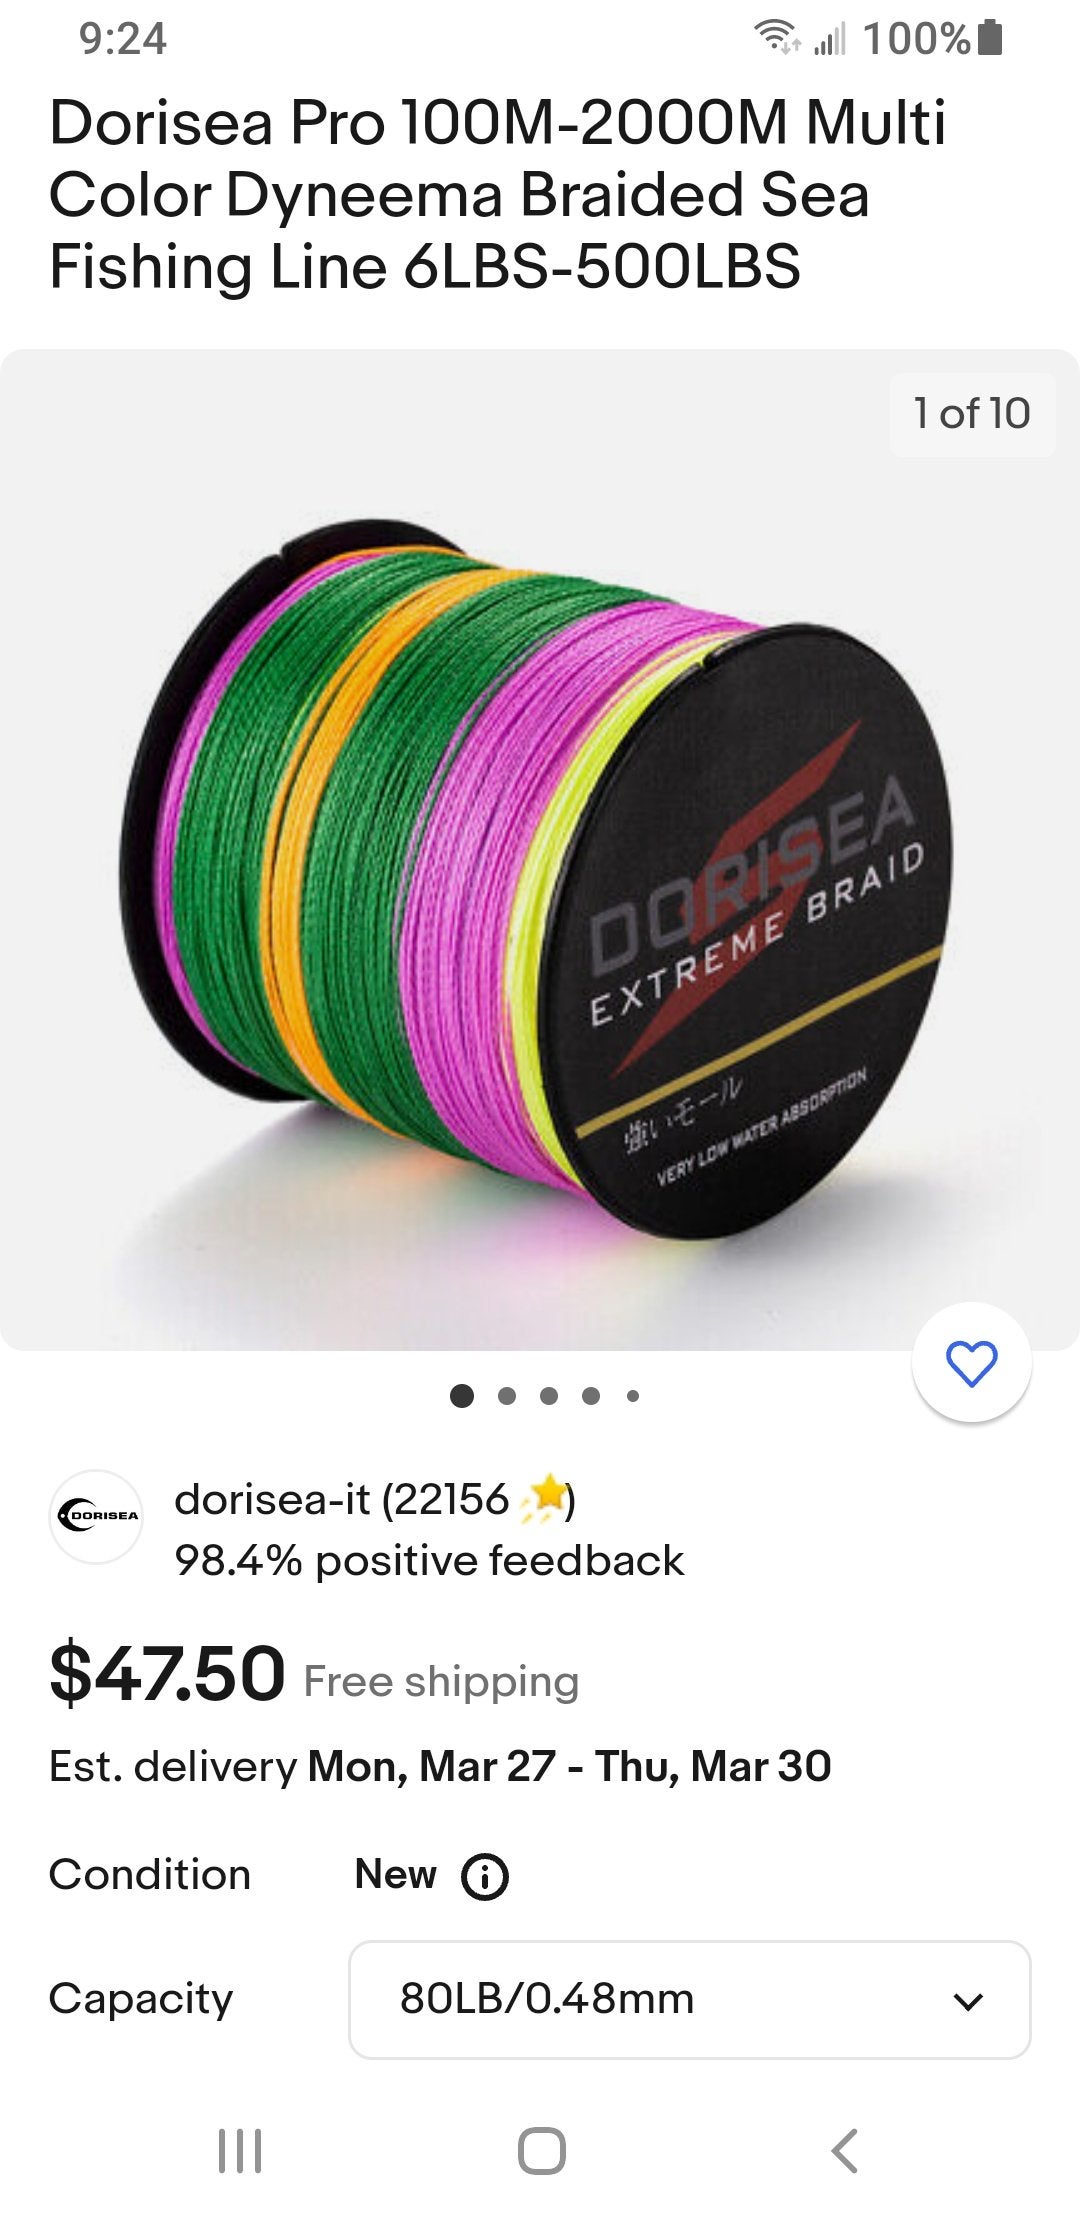 Spectra Braided Fishing Line Options